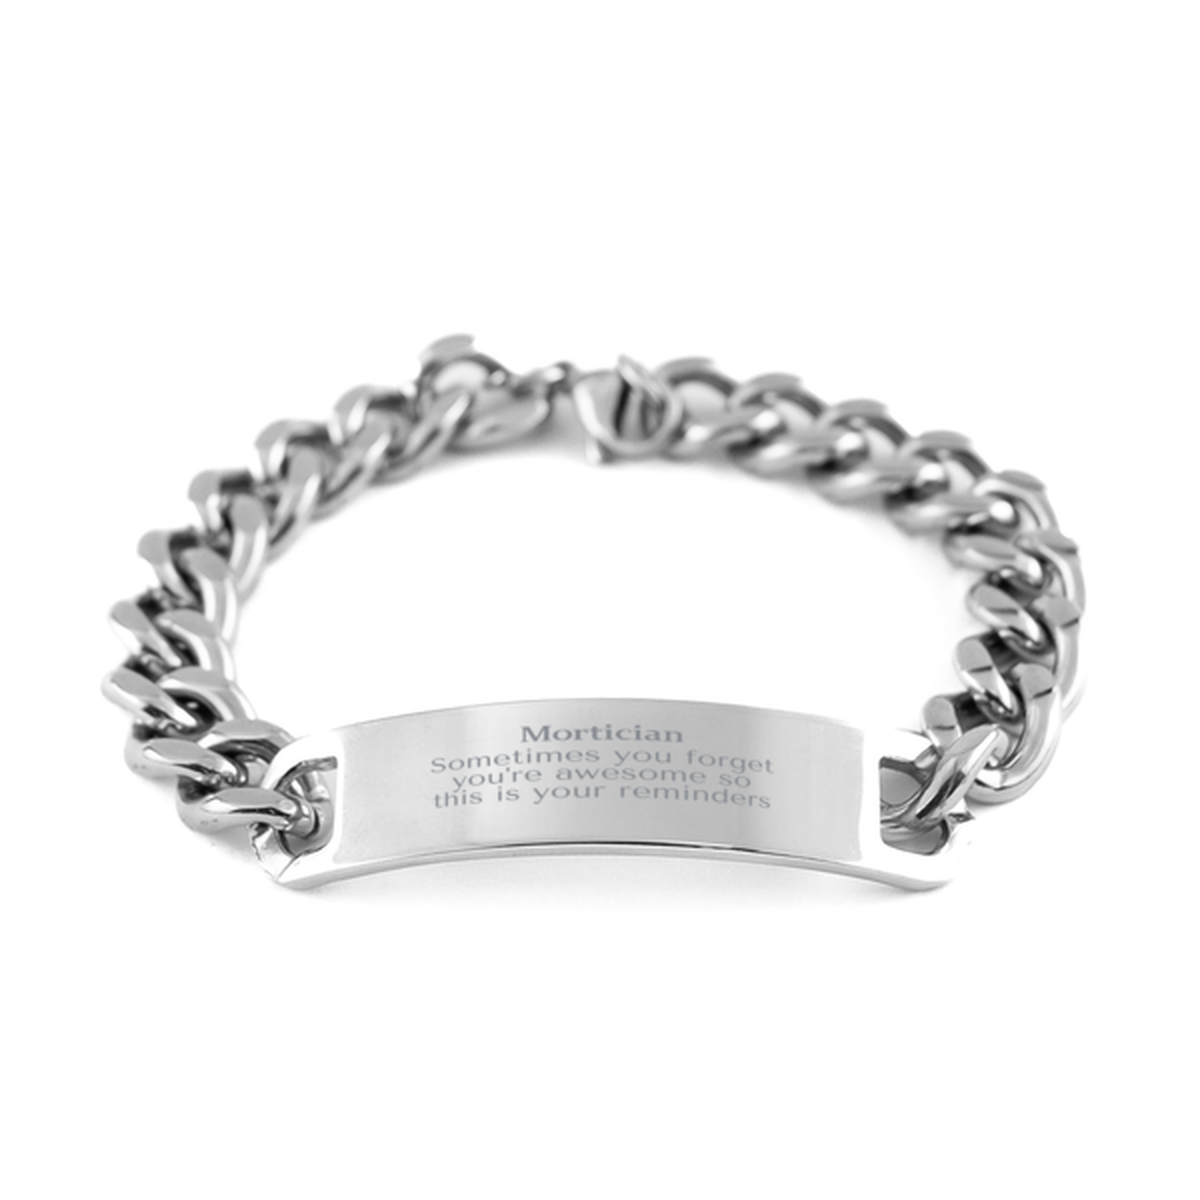 Sentimental Mortician Cuban Chain Stainless Steel Bracelet, Mortician Sometimes you forget you're awesome so this is your reminders, Graduation Christmas Birthday Gifts for Mortician, Men, Women, Coworkers